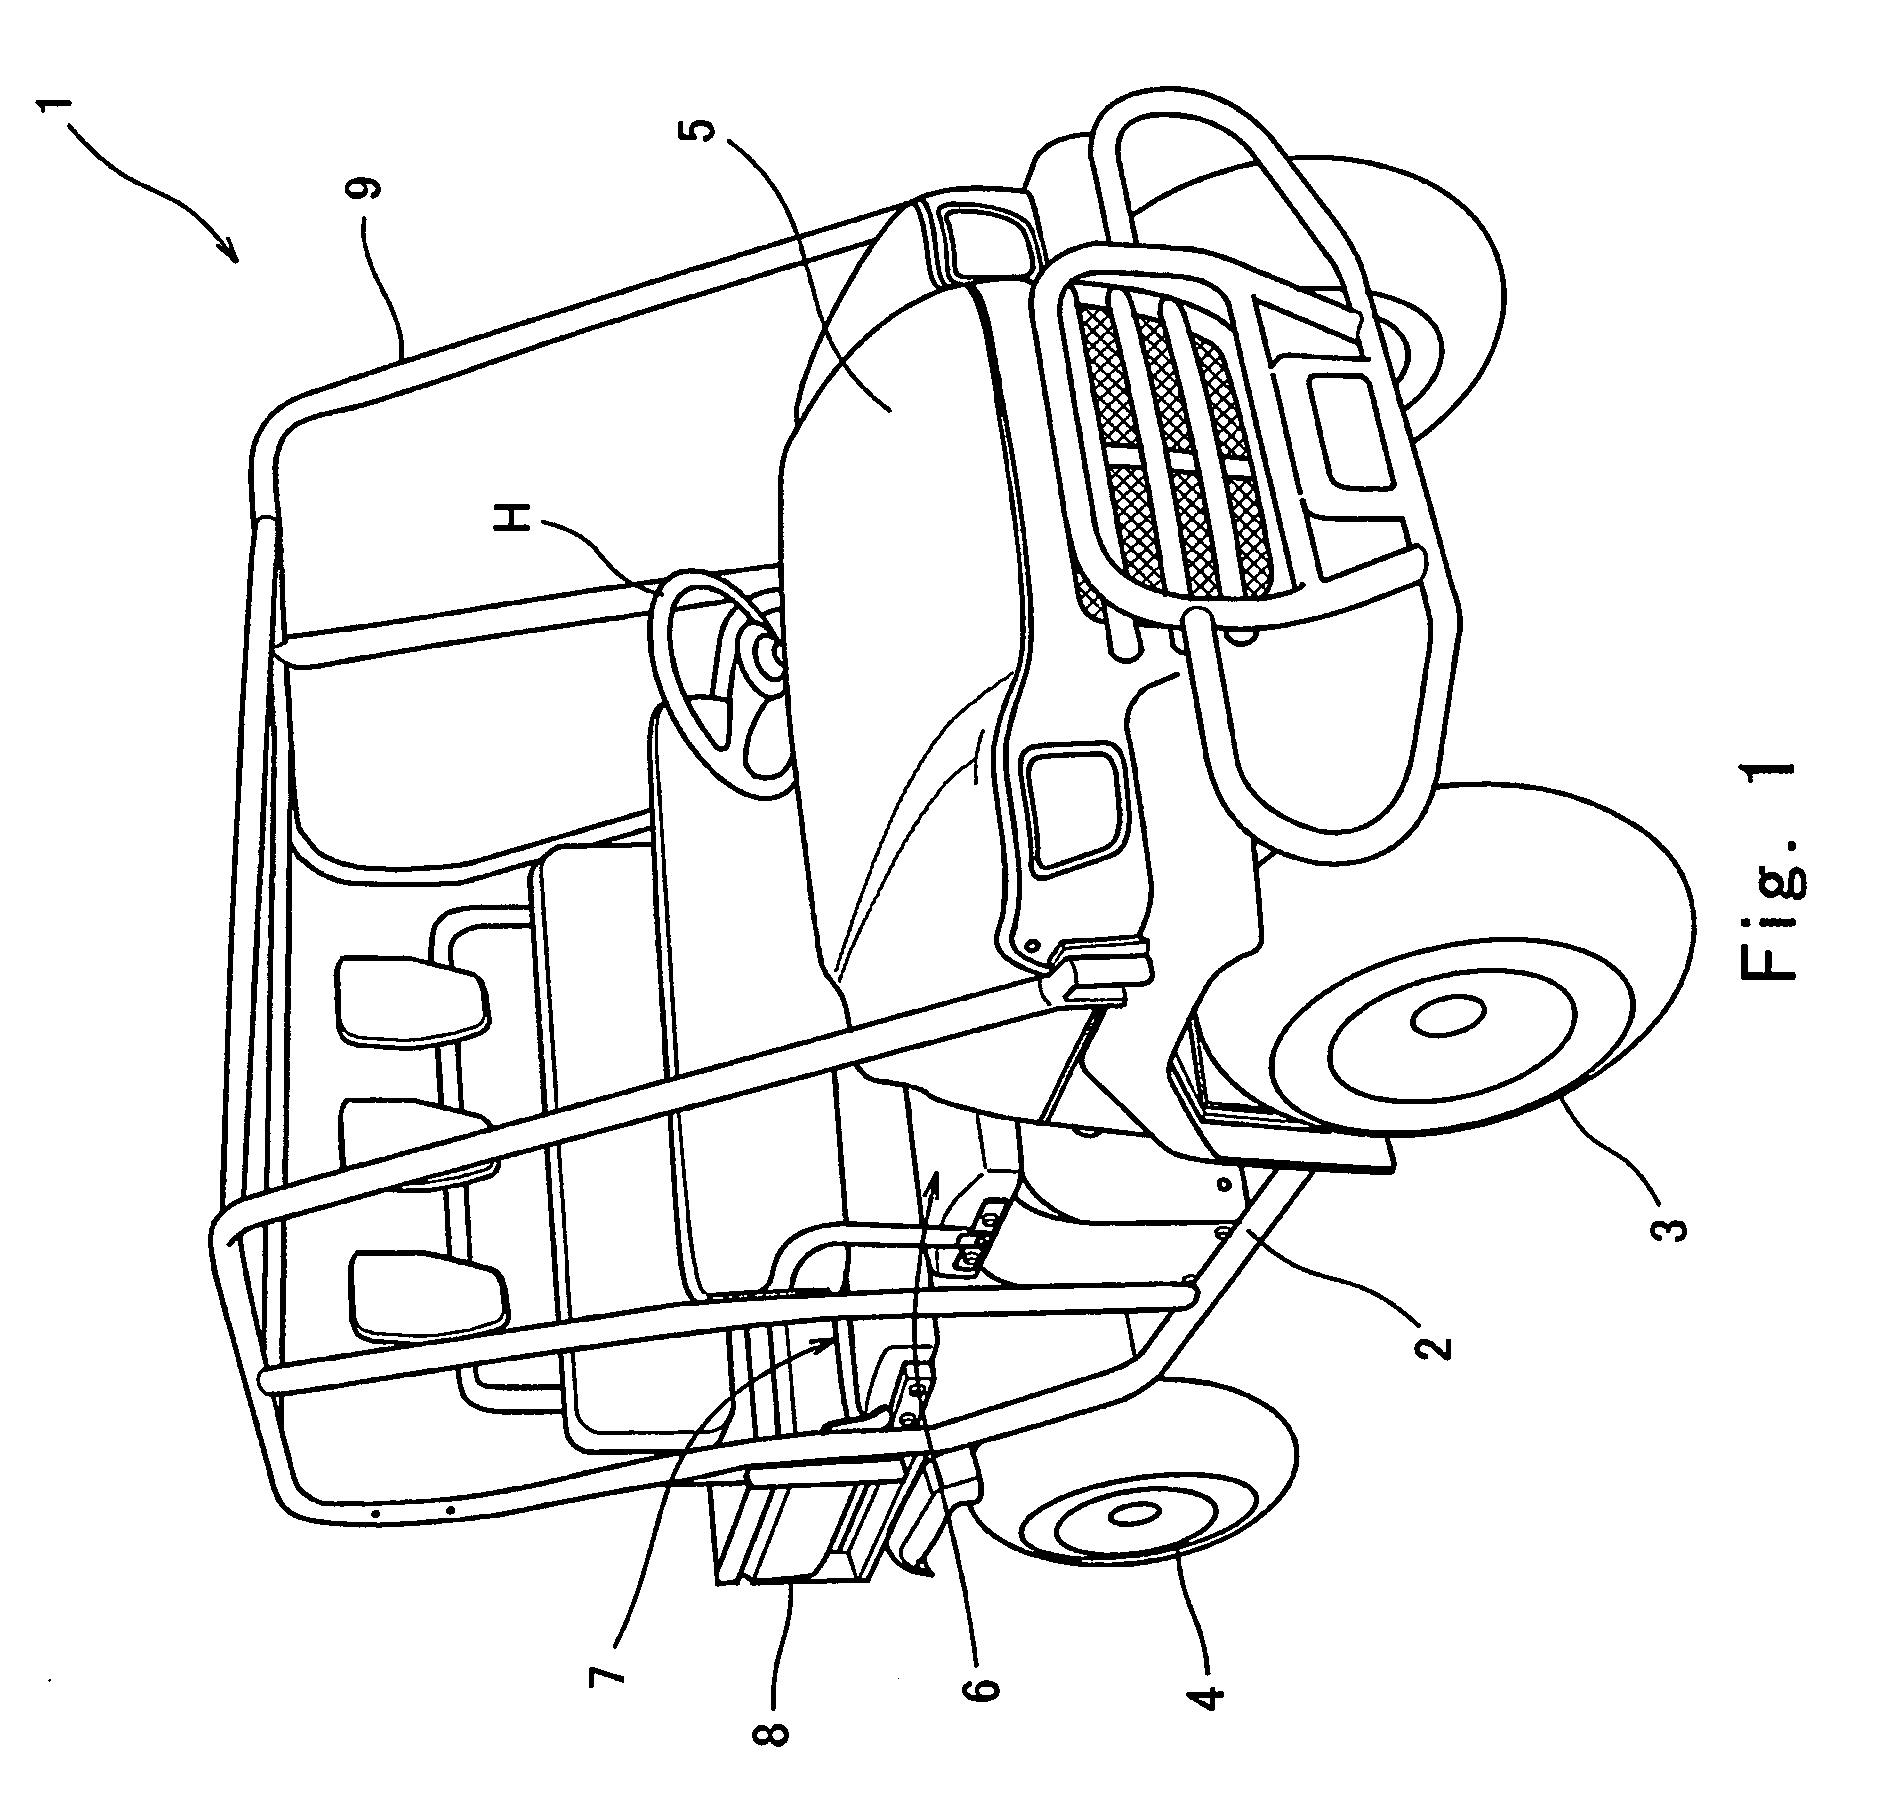 Utility vehicle equipped with extendable cargo bed